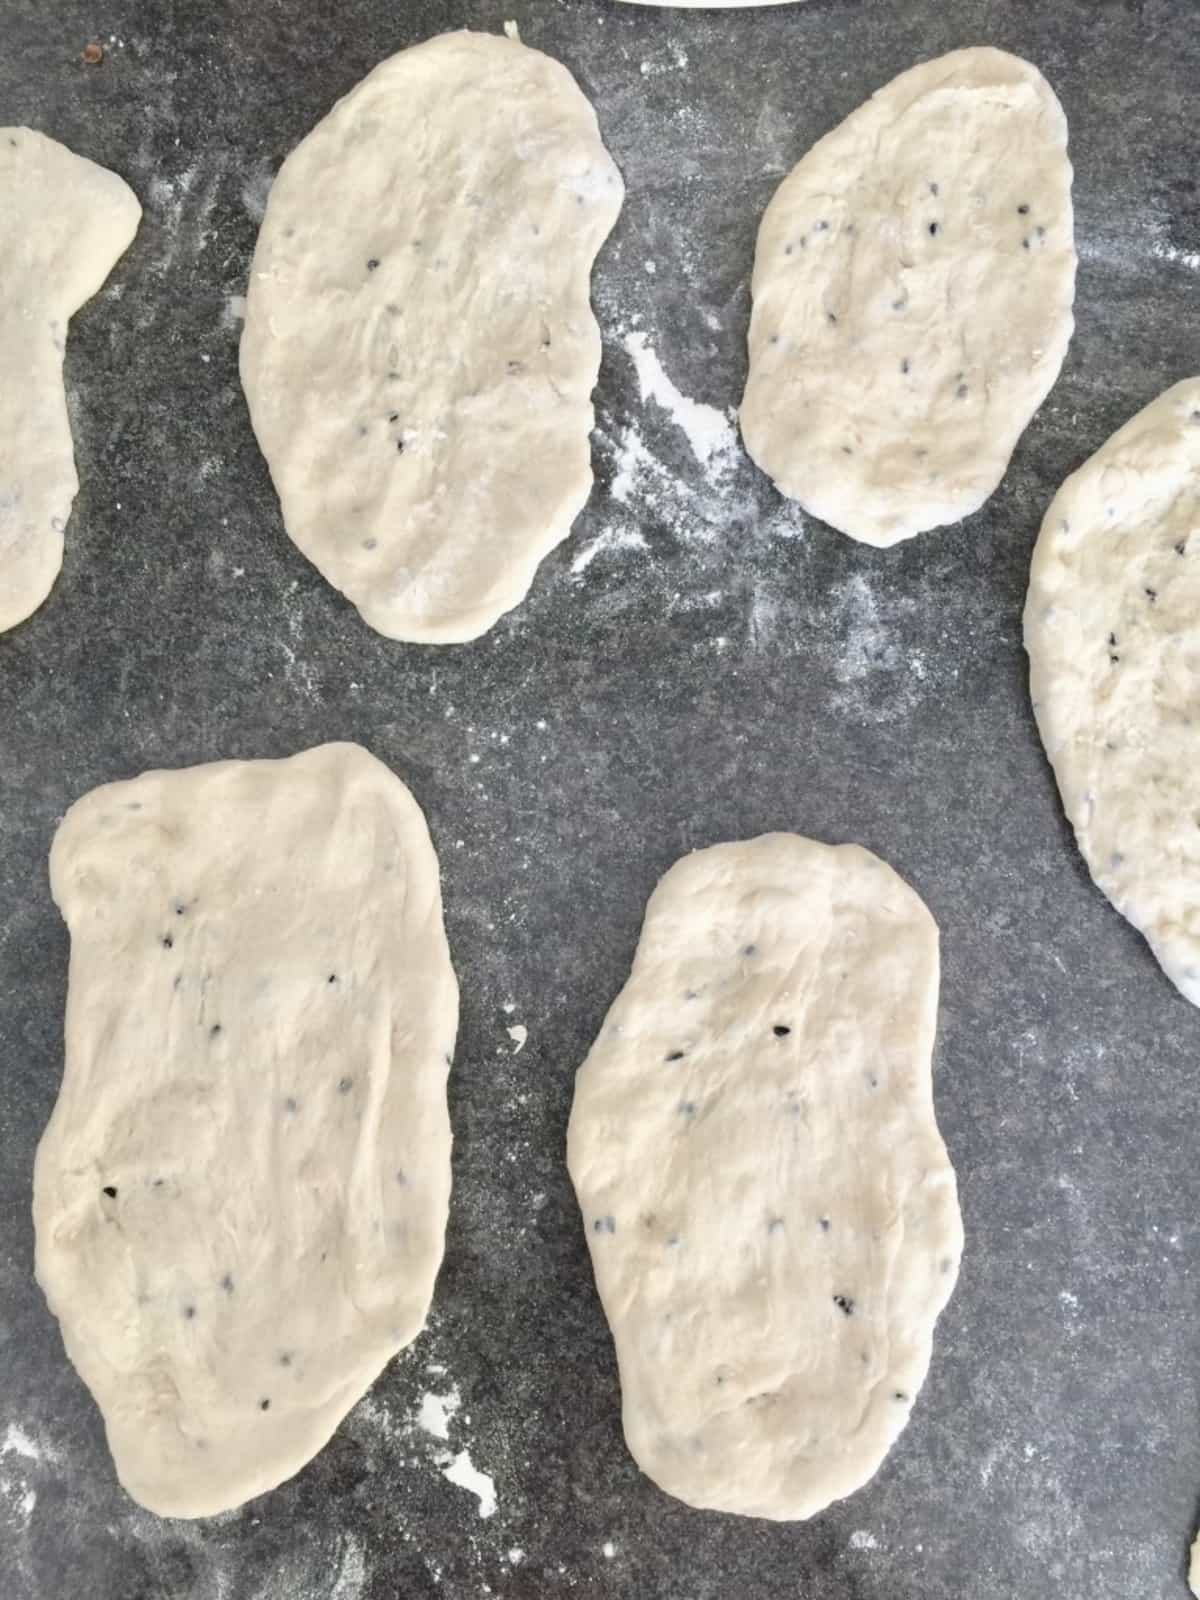 Shaped naan breads on the counter.